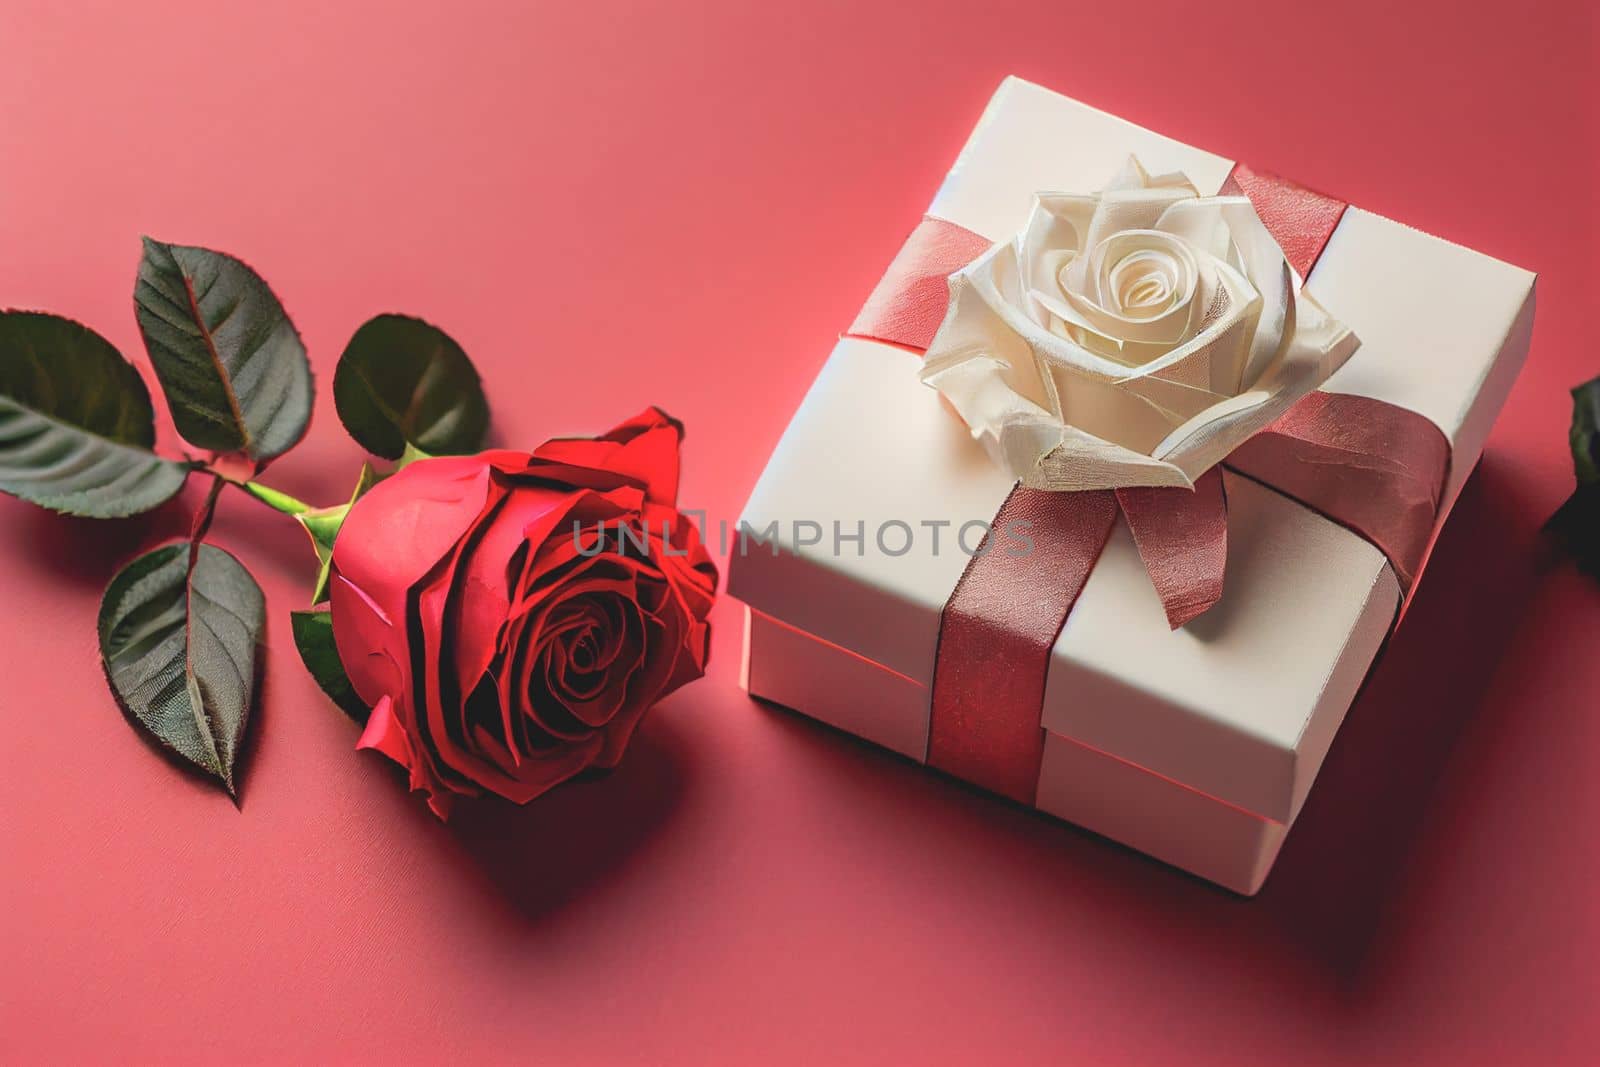 Present wrapped in red bow with single elegant rose resting on top, set against bright red background, conveying the theme of the Valentine's Day.